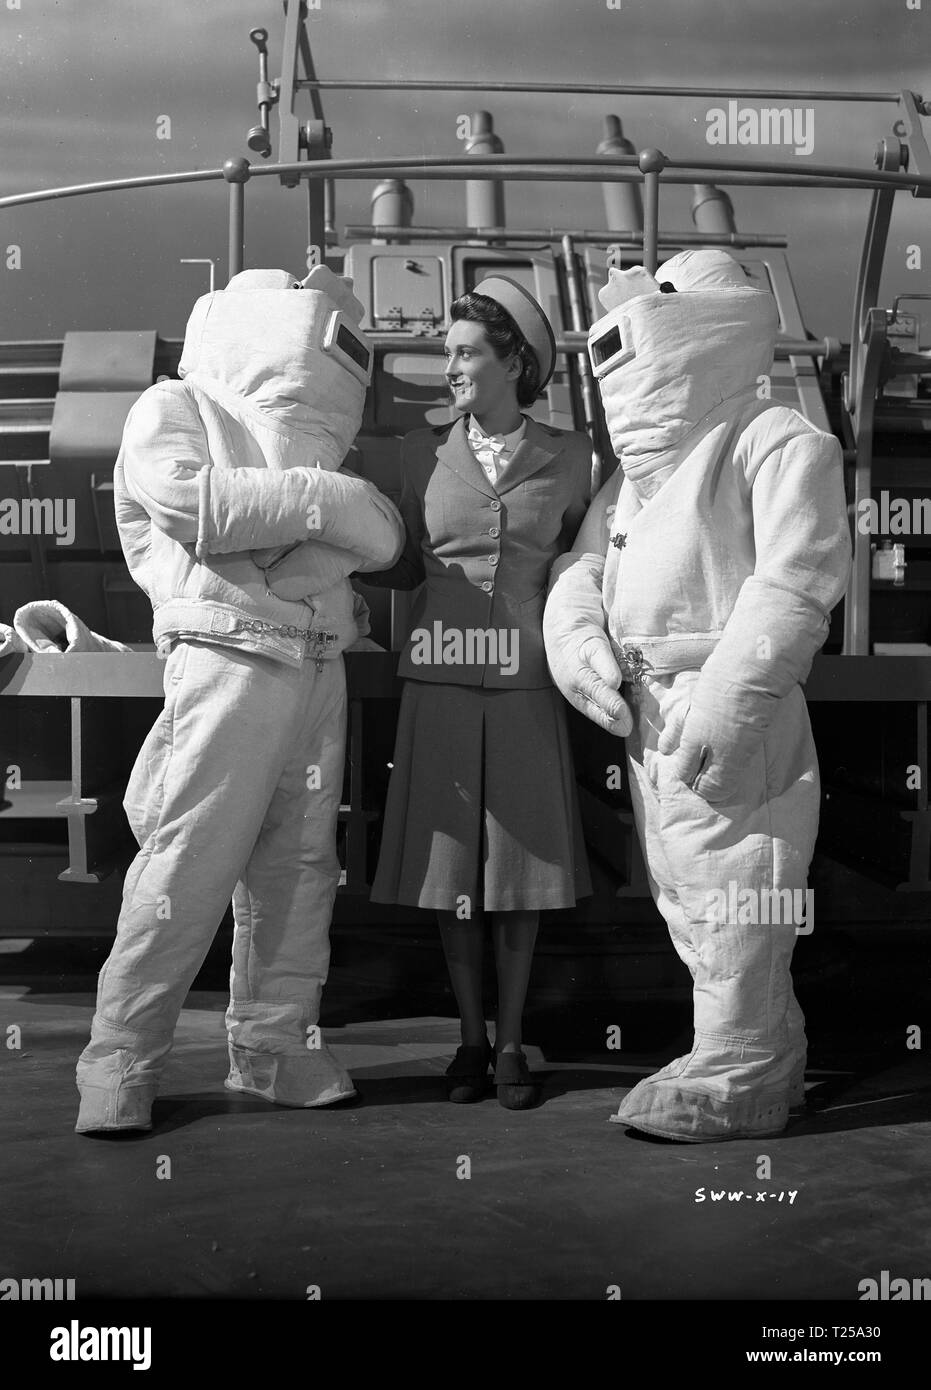 Ships with Wings (1941) Jane Baxter with two sailors in fire resistant suits     Date: 1941 Stock Photo